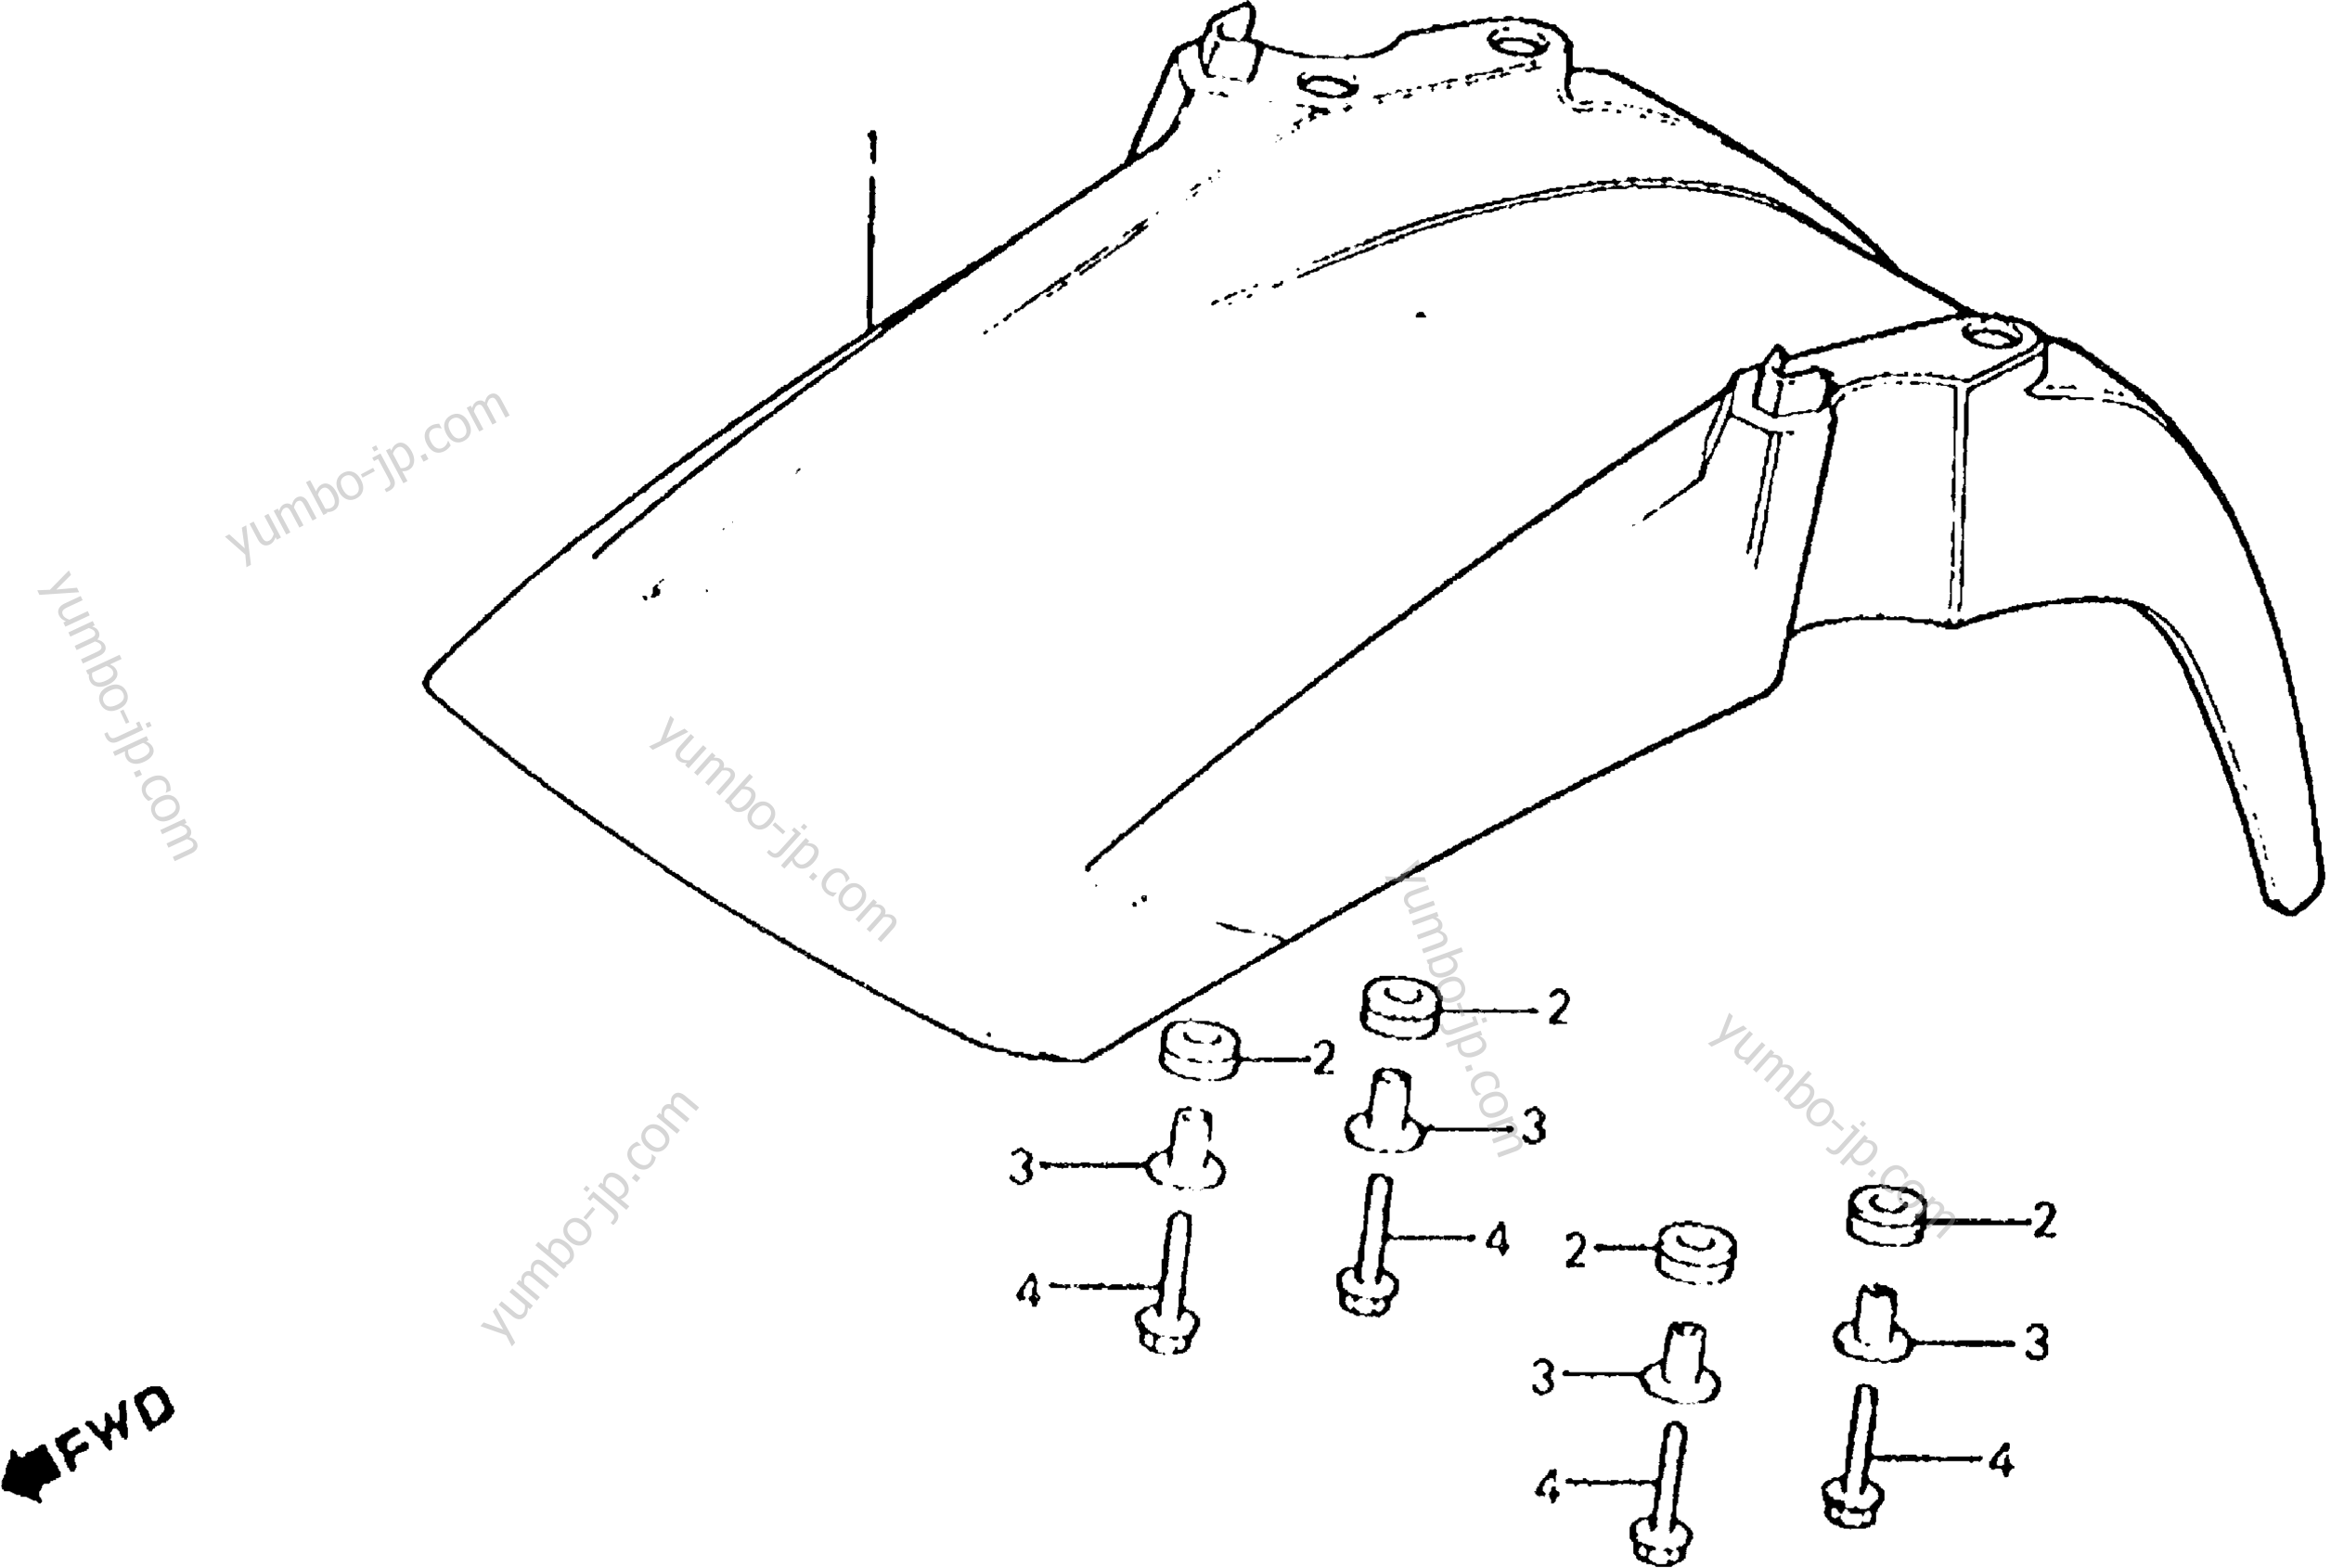 FRONT FENDER for ATVs HONDA ATC250R A 1982 year